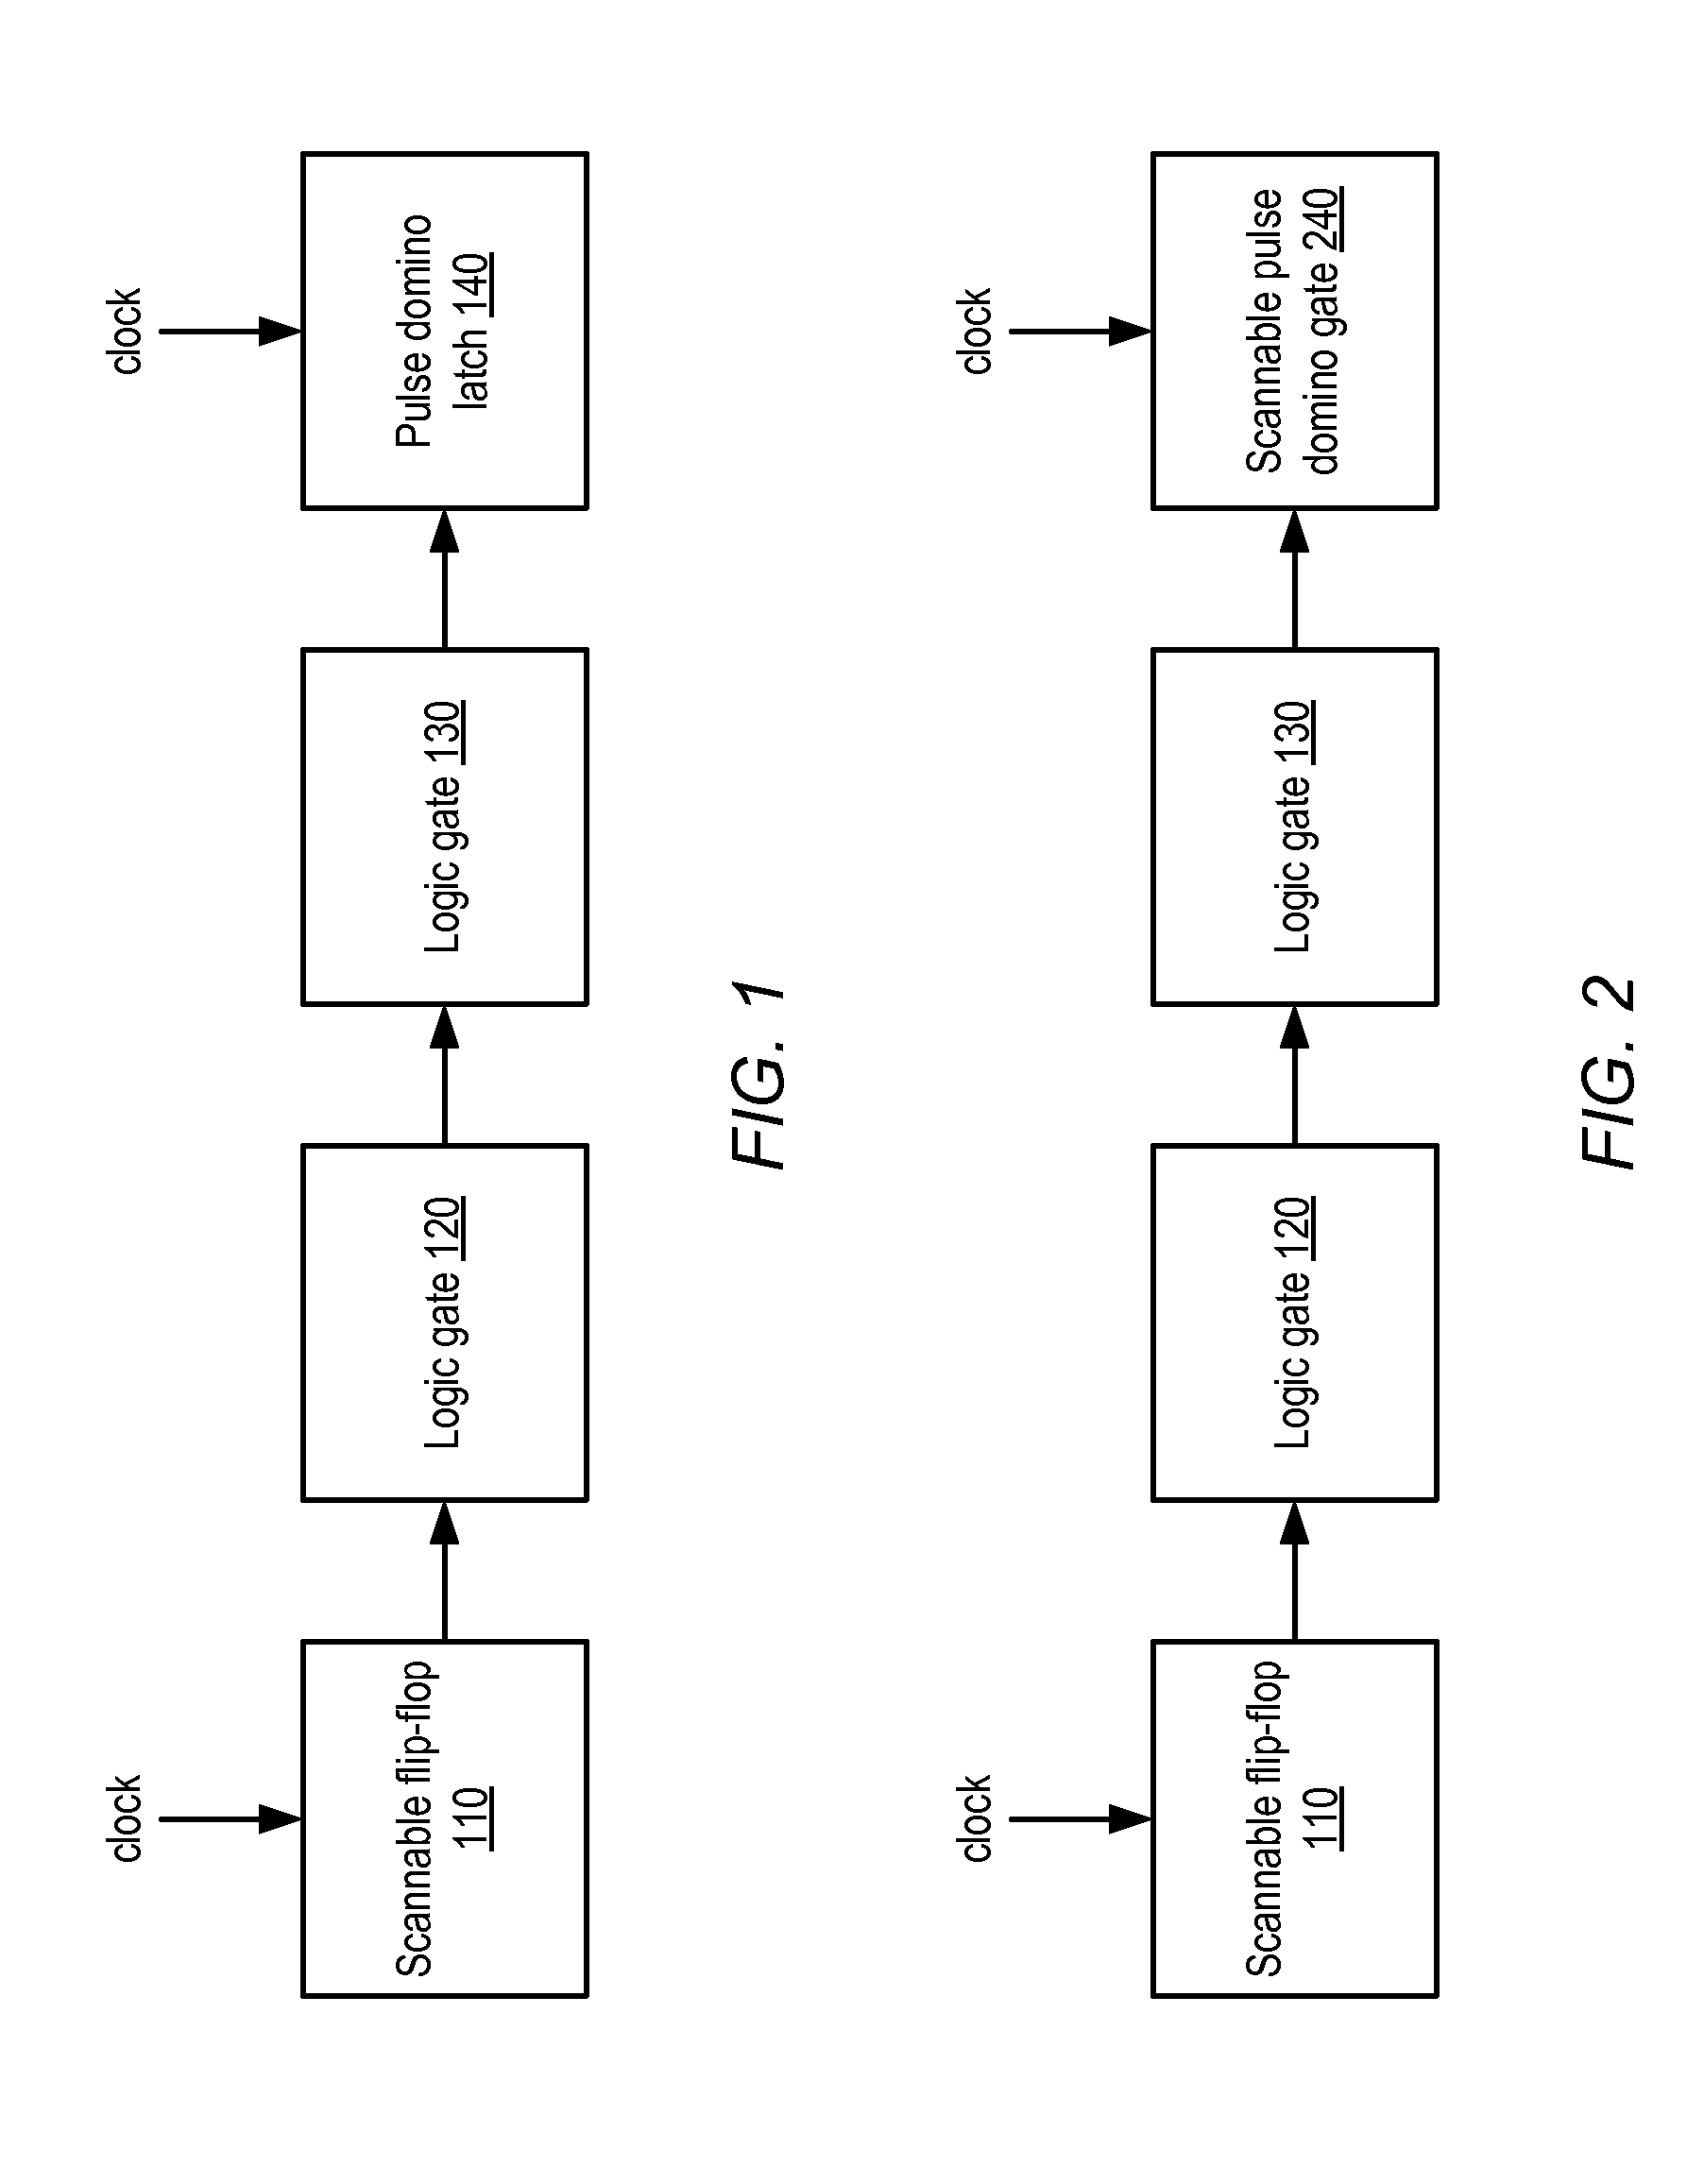 Pulse dynamic logic gates with lssd scan functionality